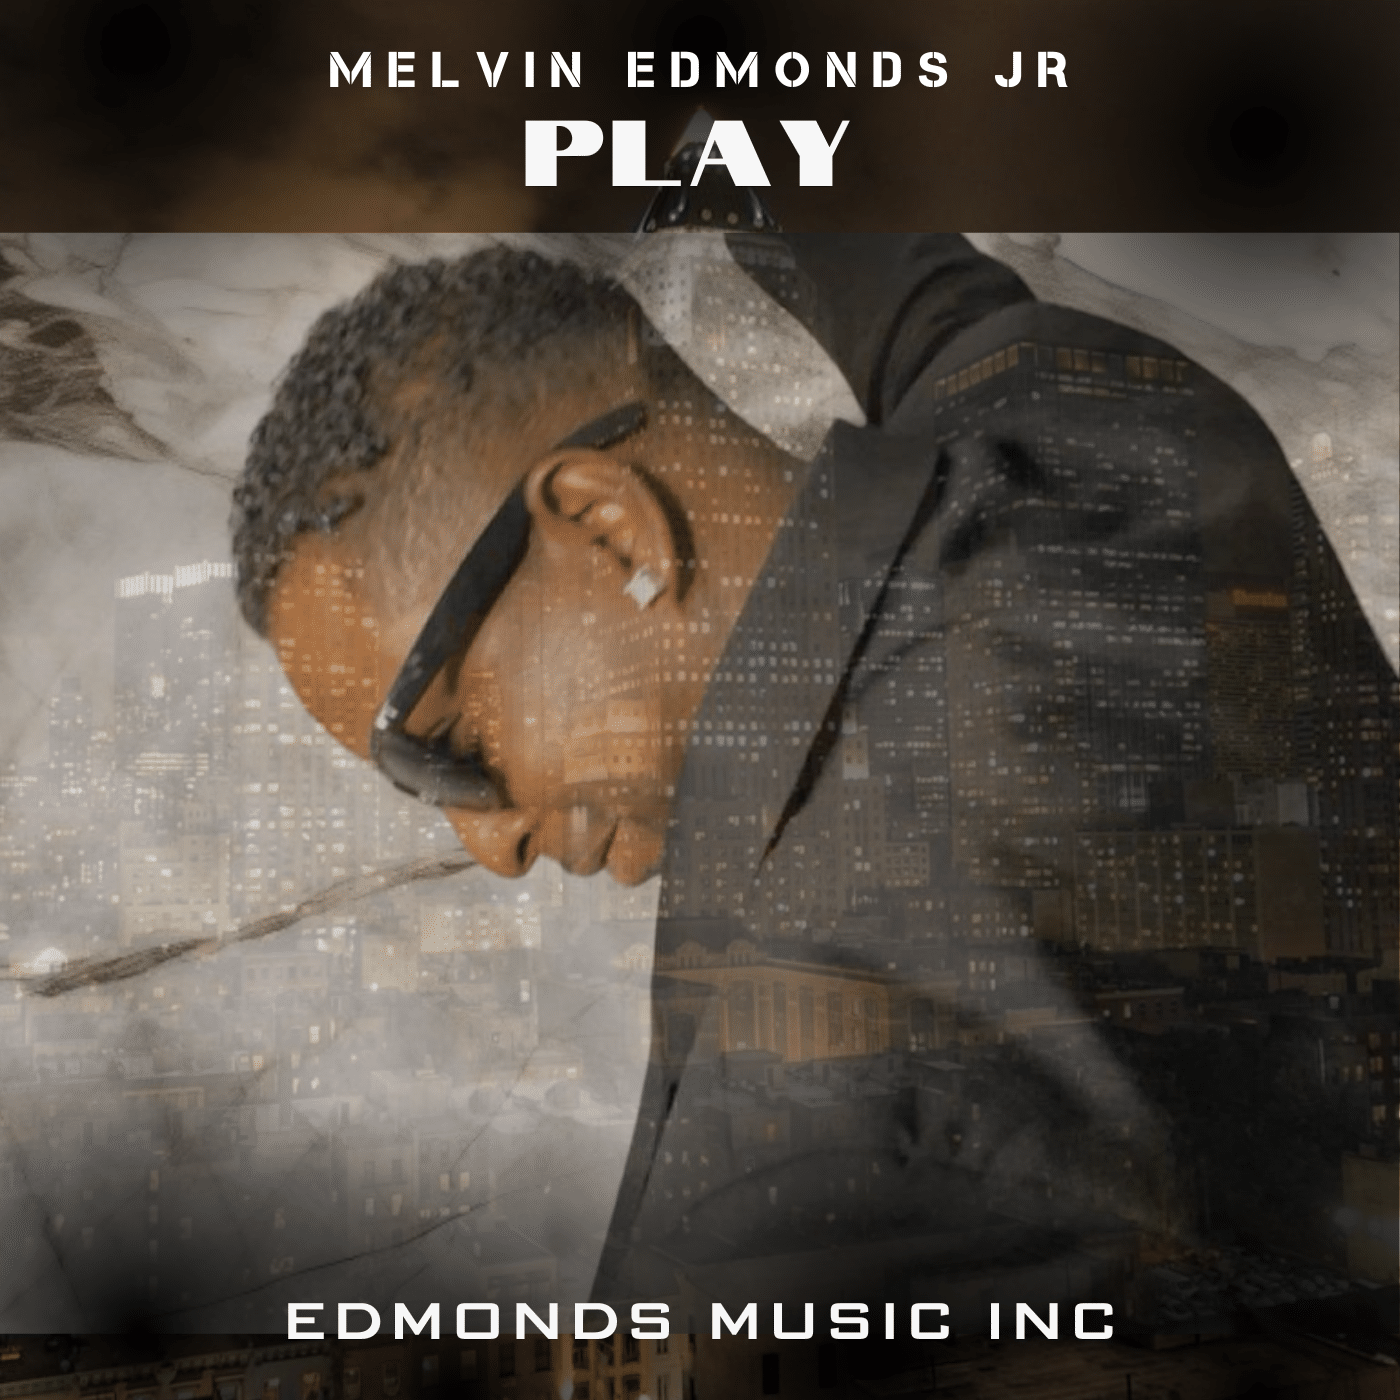 Infusing New Life into New Jack Swing: The Musical Innovations of Melvin Edmonds JR. and Nyk Alexzander